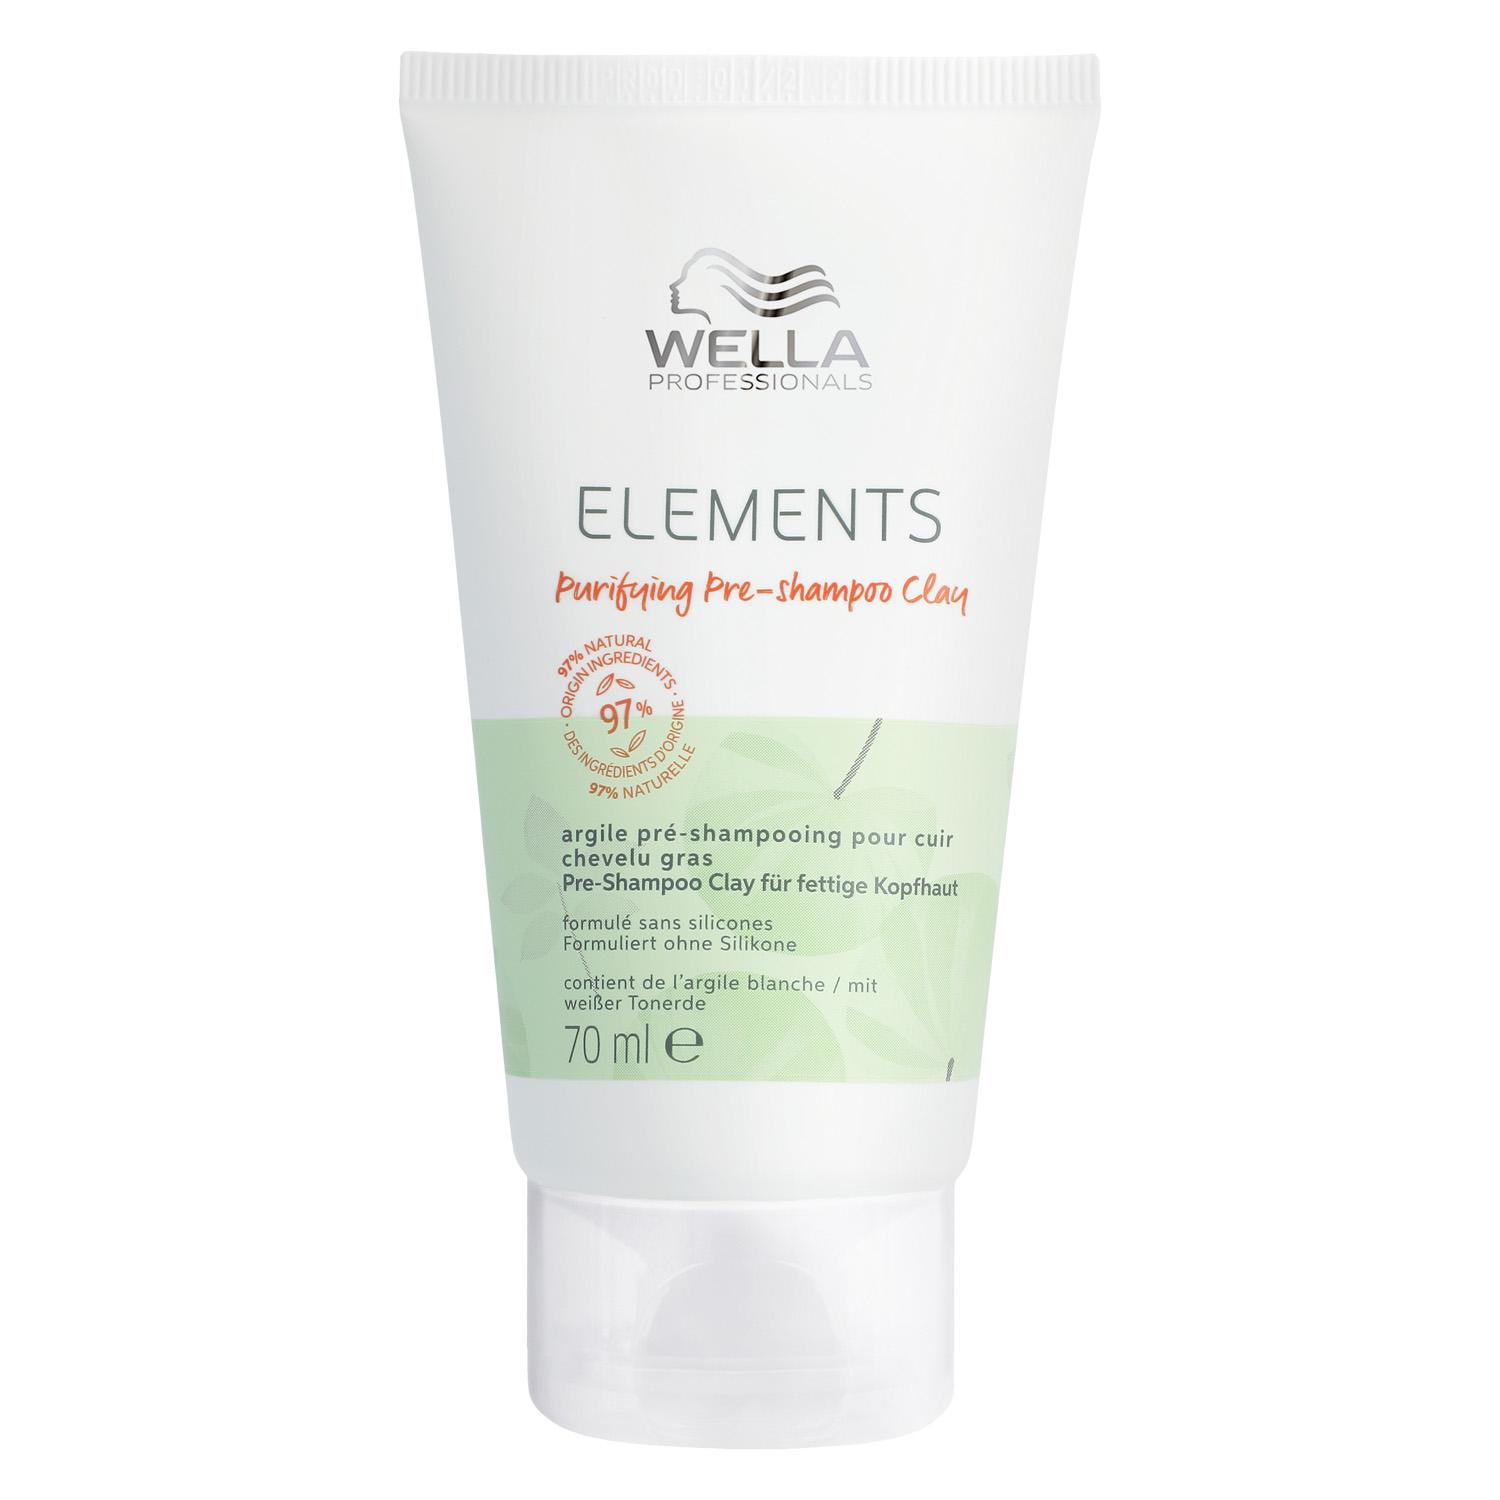 Elements - Purifying Pre-Shampoo Clay